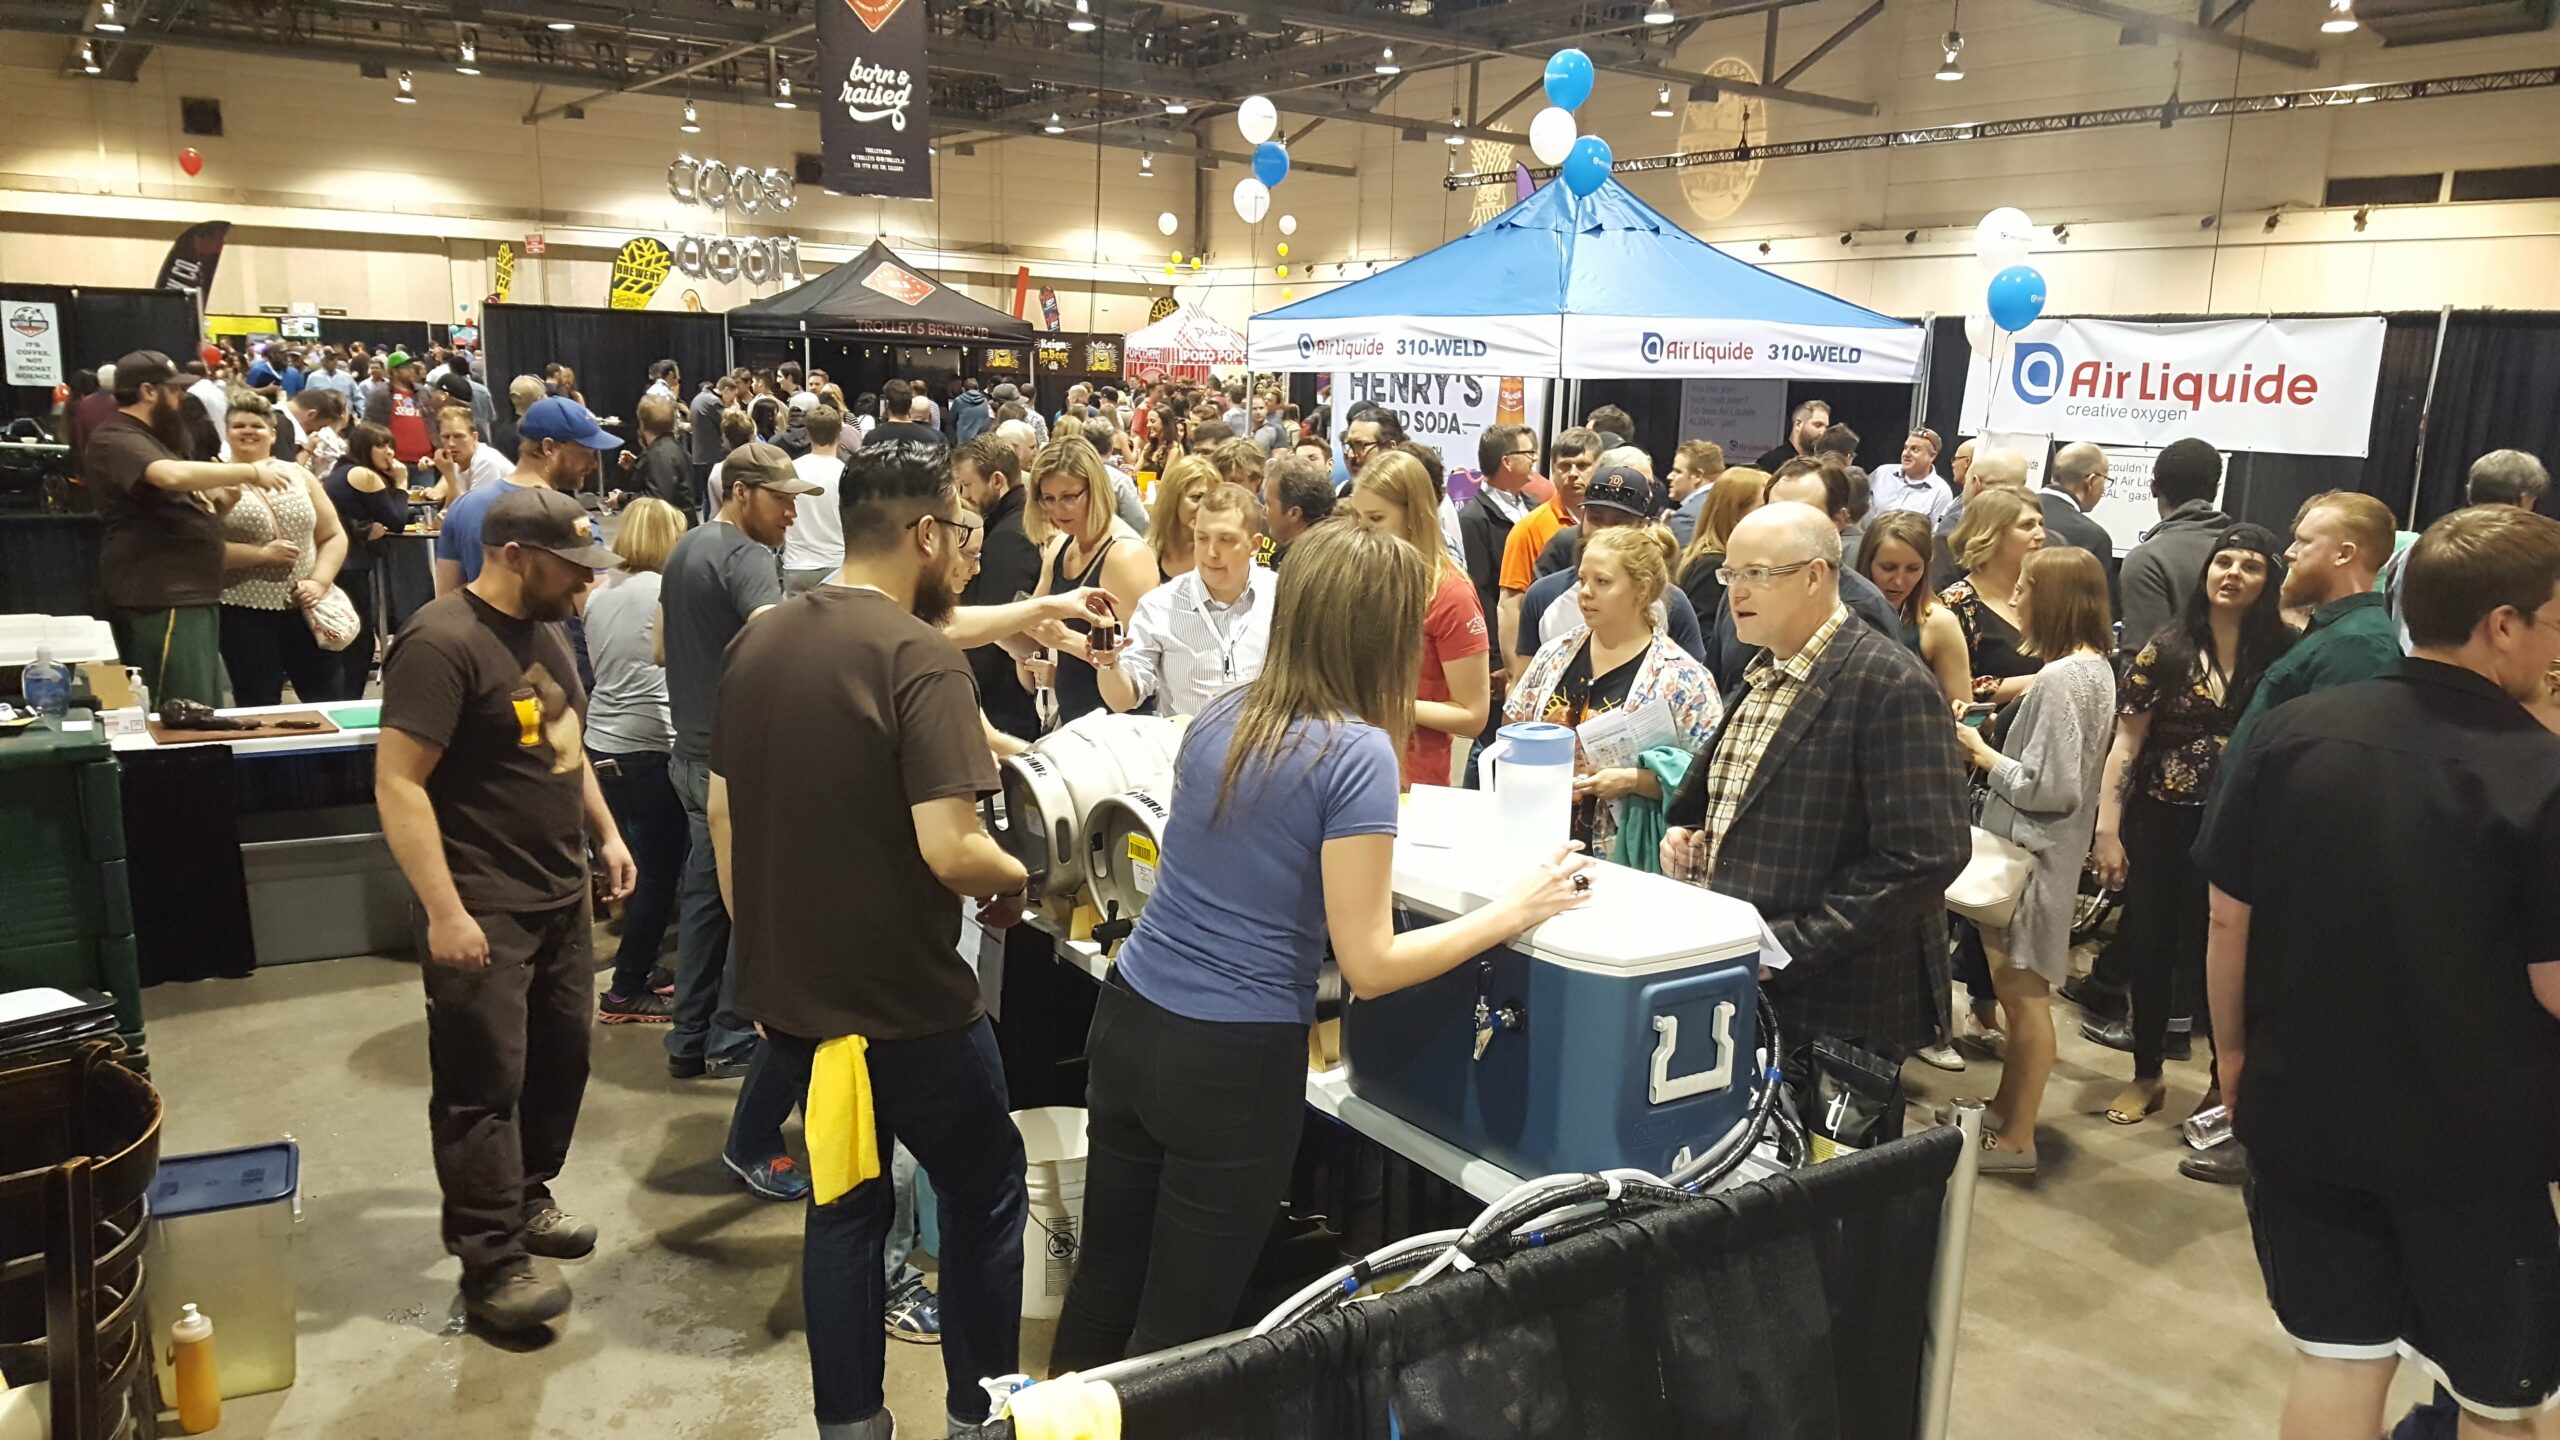 The Prairie Dog Brewing team serves up delicious barbecue and craft beer at the Calgary International Beerfest in May, 2018.